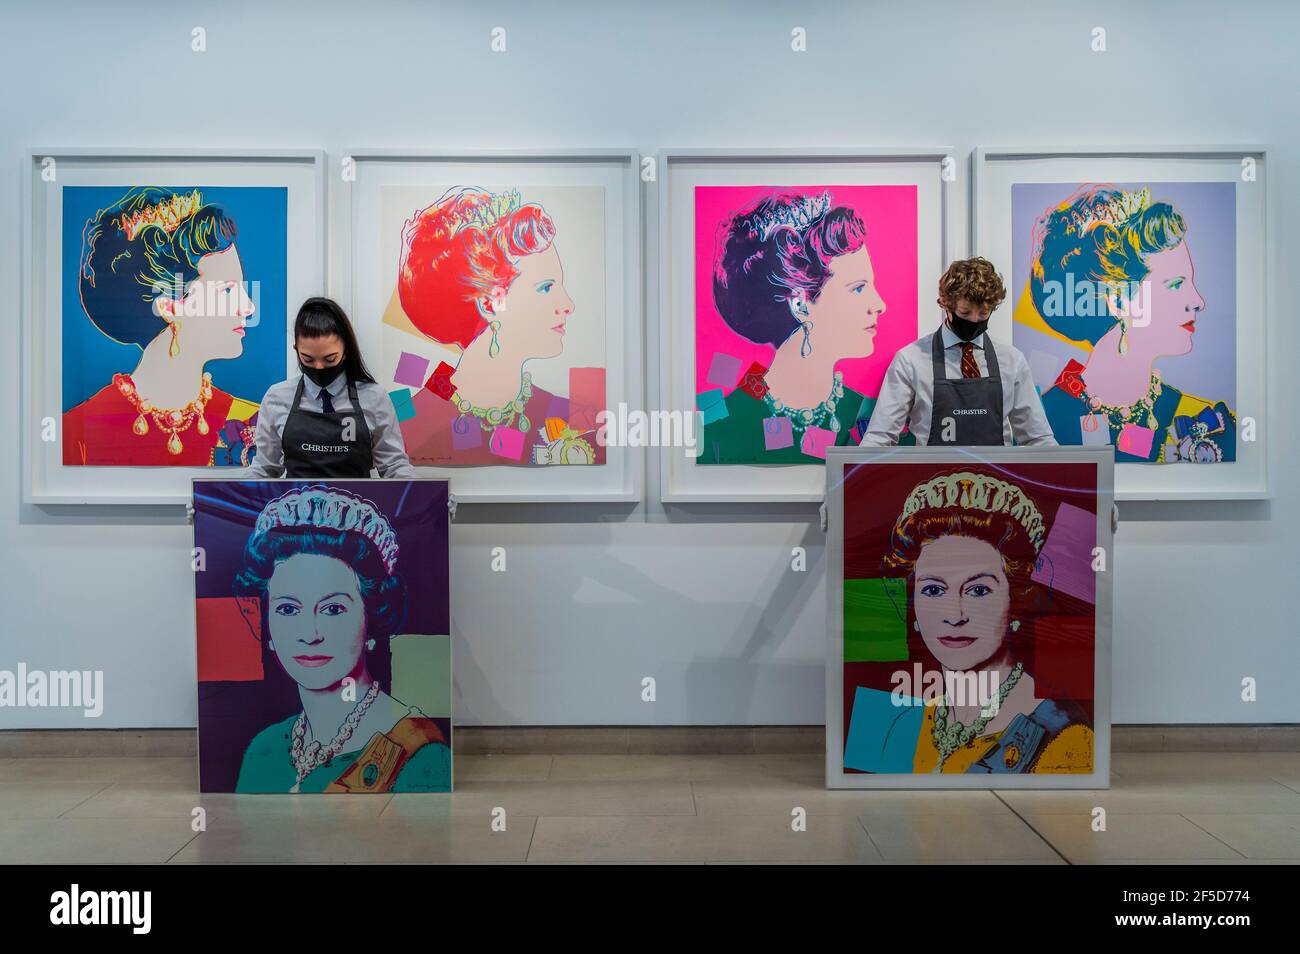 London, UK. 26 Mar 2021. Andy Warhol, Queen Elizabeth II, from: Reigning Queens (Royal Edition) screenprint in colours with diamond dust, 1985, a printer's proof, from the deluxe Royal Edition with diamond dust, Estimate: £100,000-150,000 and Queen Elizabeth II, from: Reigning Queens (L), 1985, numbered 7/40, Estimate: £70,000-100,000 with Queen Margarethe II of Denmark, from: Reigning Queens (Royal Edition) the set of four screenprints in colours with diamond dust, numbered R26/30 Estimate: £60,000-80,000and other works - Behind Closed Doors: Preparations take place at Christie's ahead of the Stock Photo